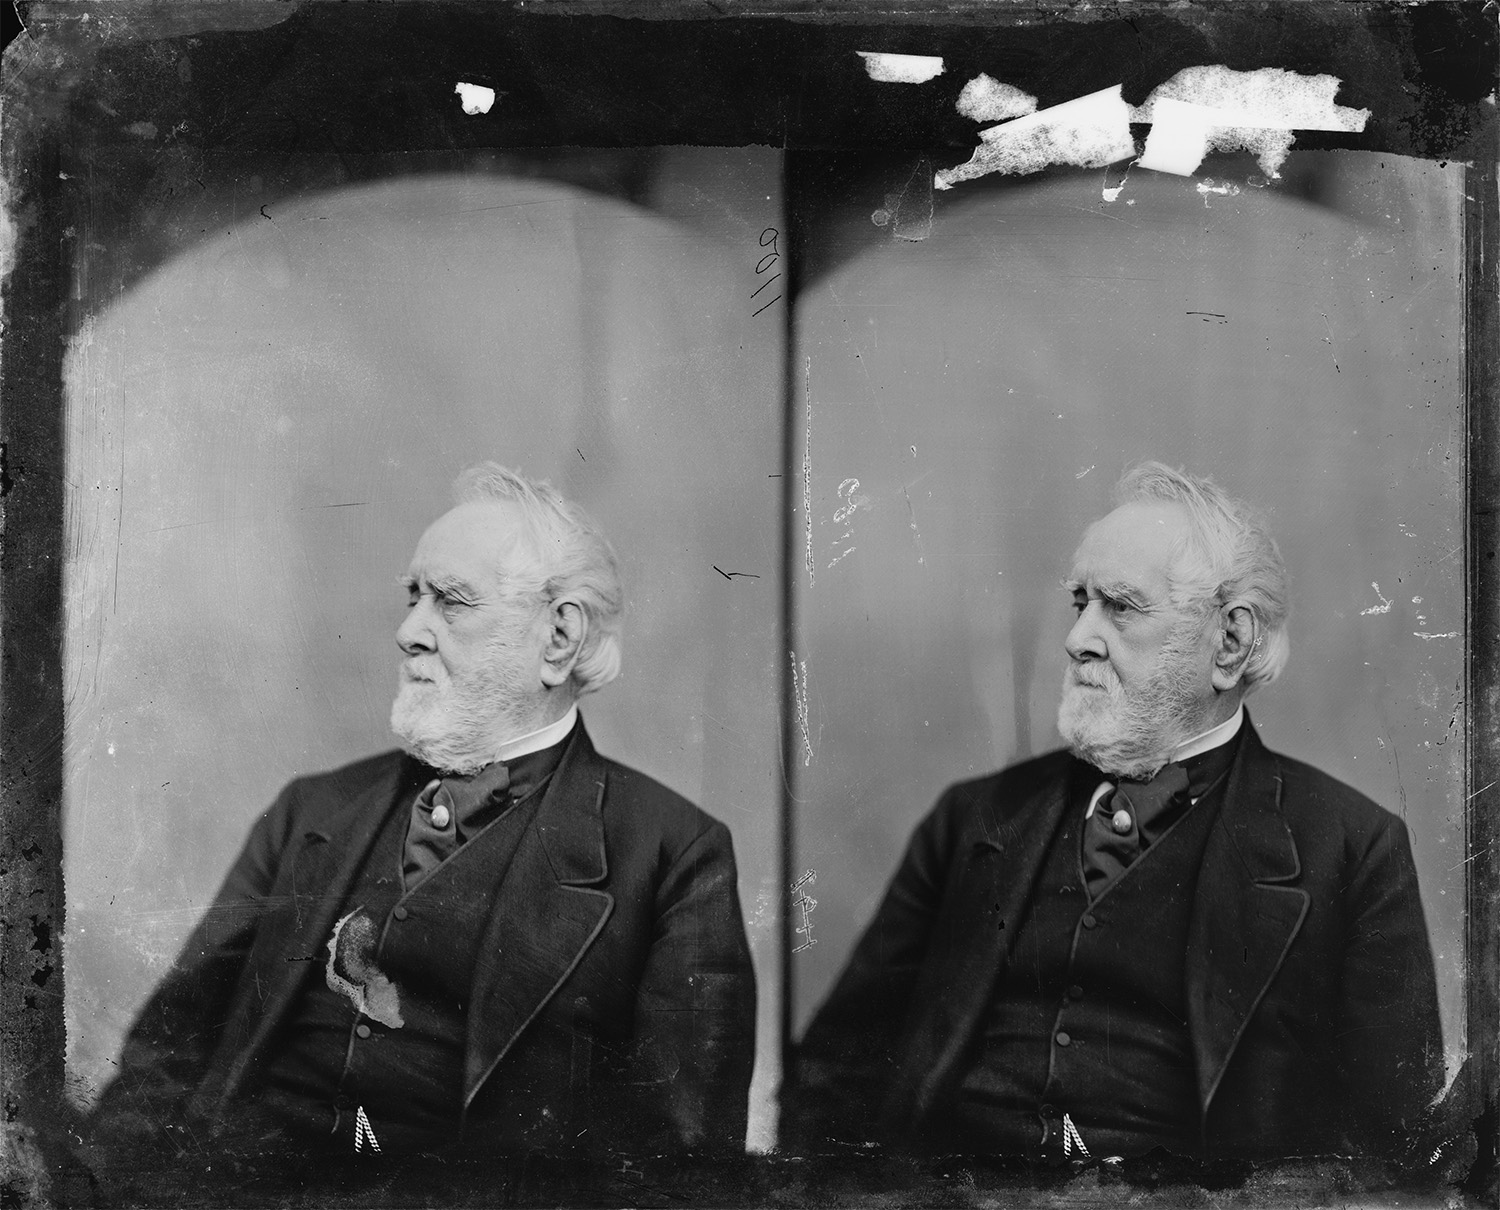 Mathew Brady, Photographs of William Wilson Corcoran, ca. 1865–80. Brady-Handy Photograph Collection, Prints and Photographs Division, Library of Congress.